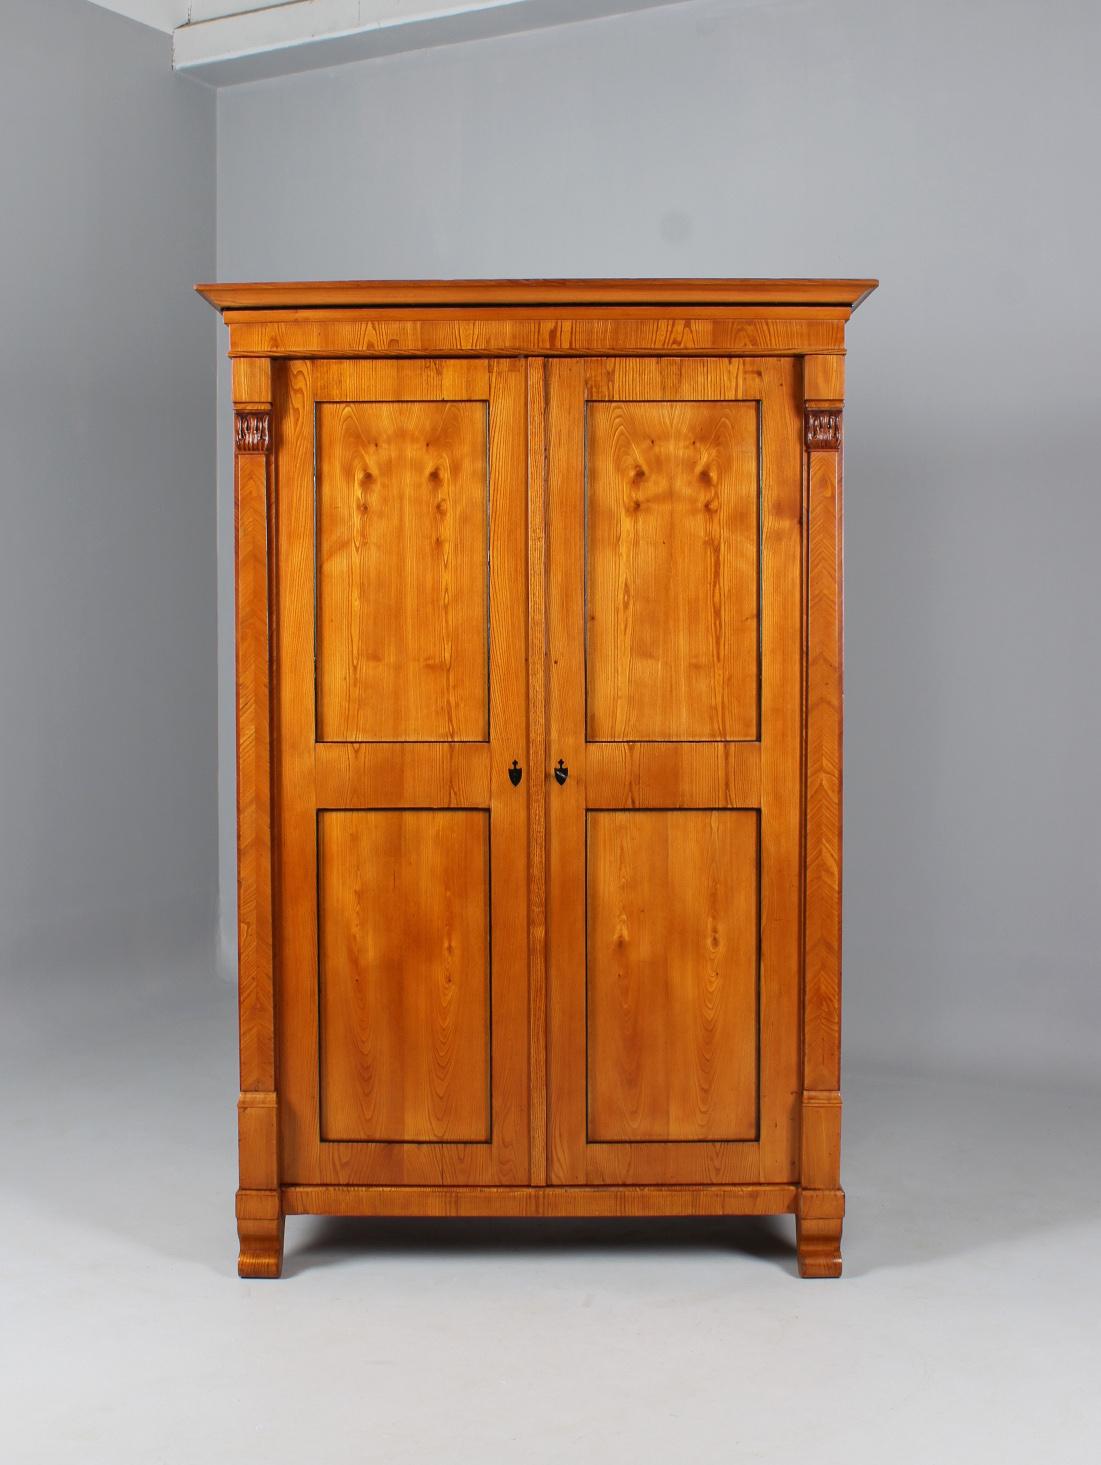 Antique armoire

South Germany
Ash
Biedermeier around 1835

Dimensions: H x W x D: 205 x 136 x 66 cm

Description:
Two-door closet standing on elegantly curved elaborated legs.
All surfaces are veneered in ash on softwood, the filling